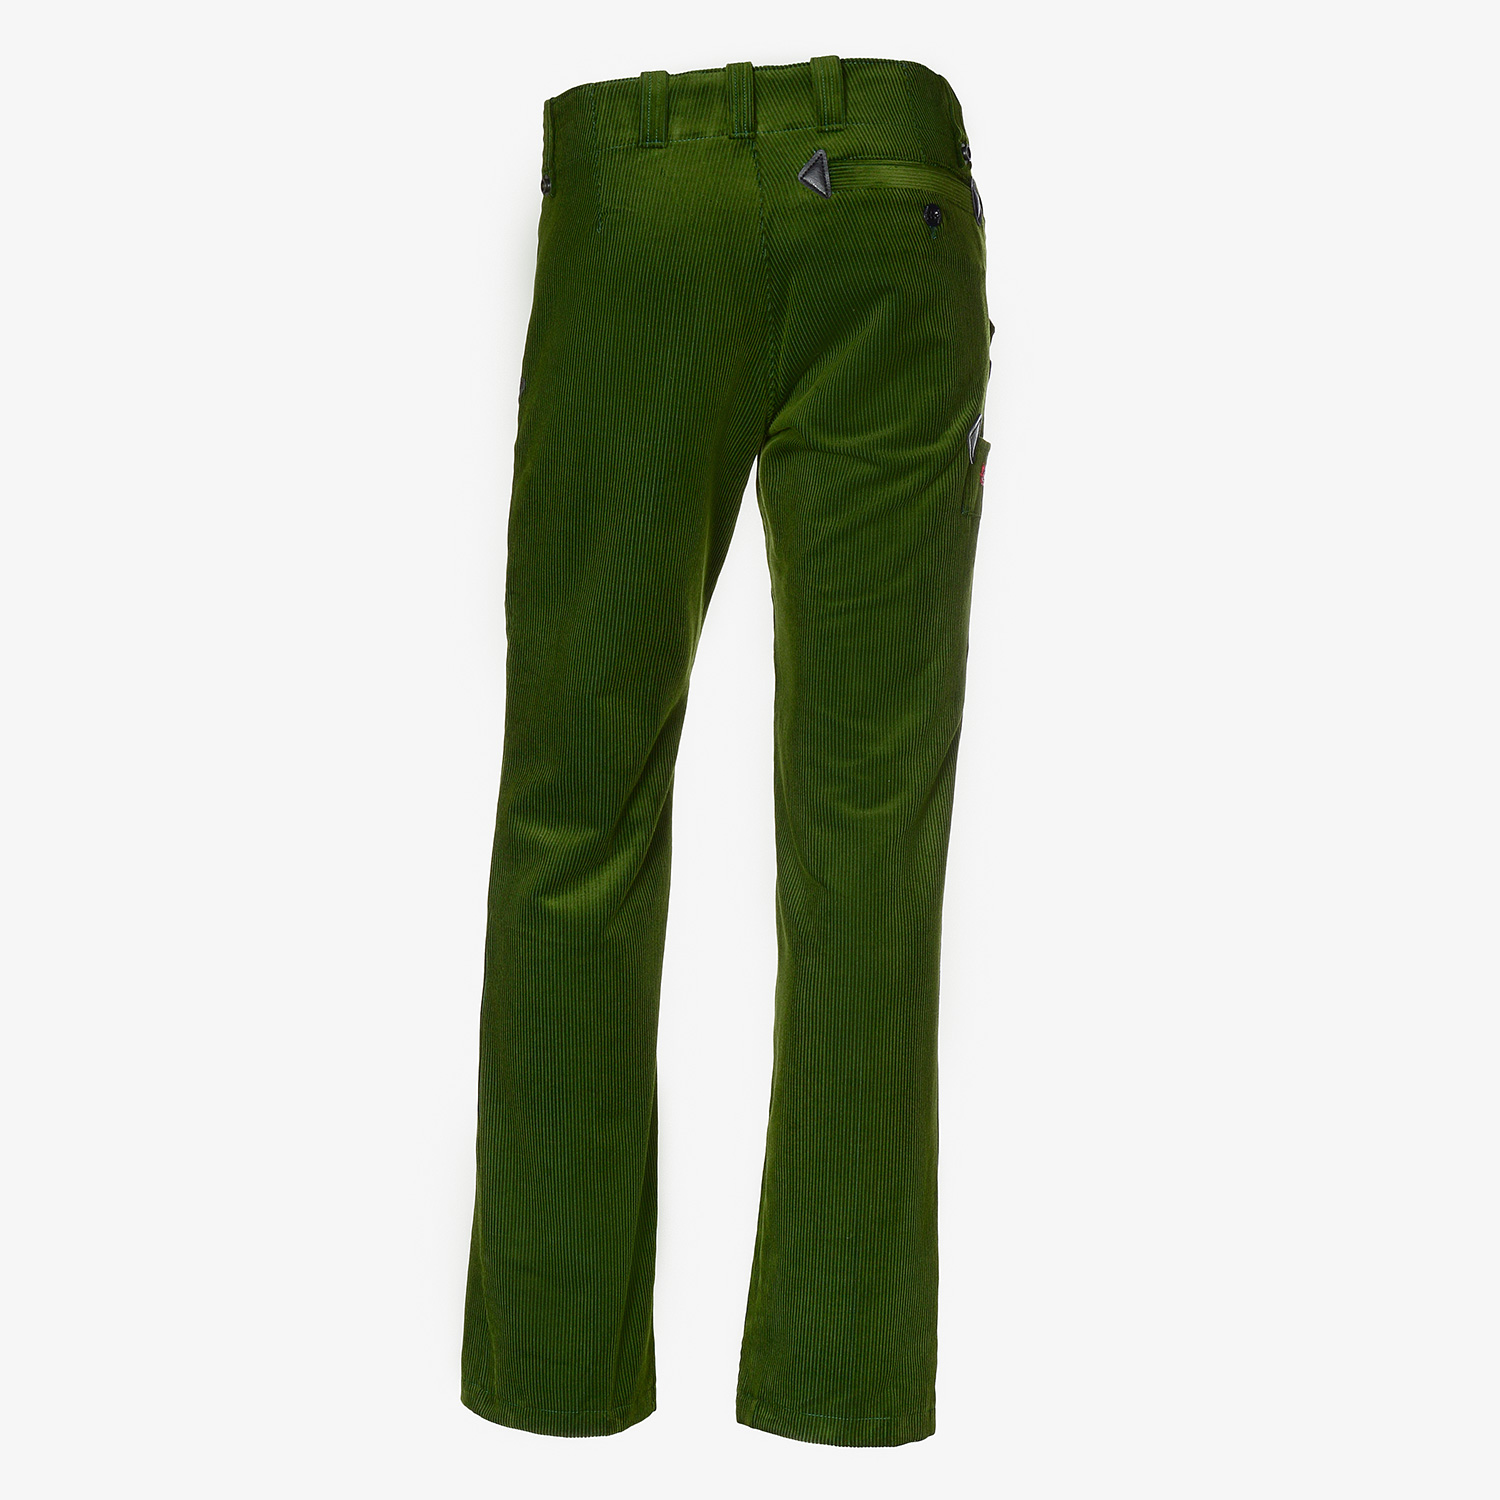 HANS guild trousers corduroy stretch without bell bottom